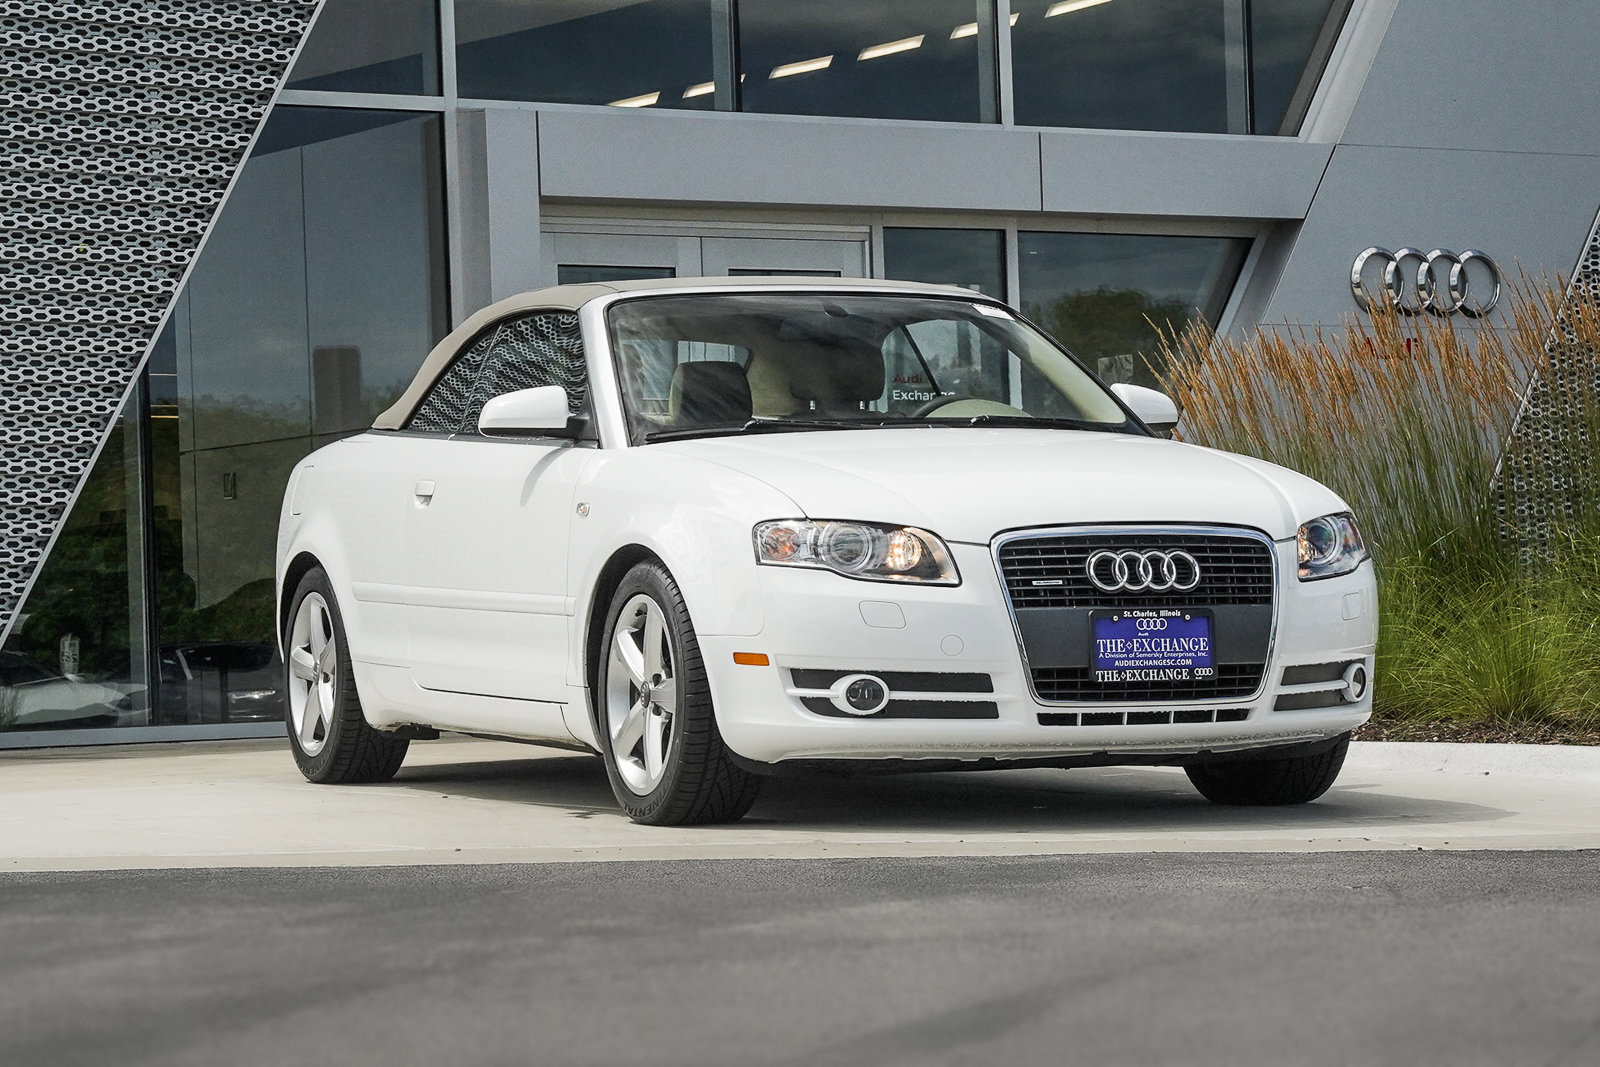 Used 2008 Audi A4 Base with VIN WAUDH48H78K008363 for sale in Saint Charles, IL